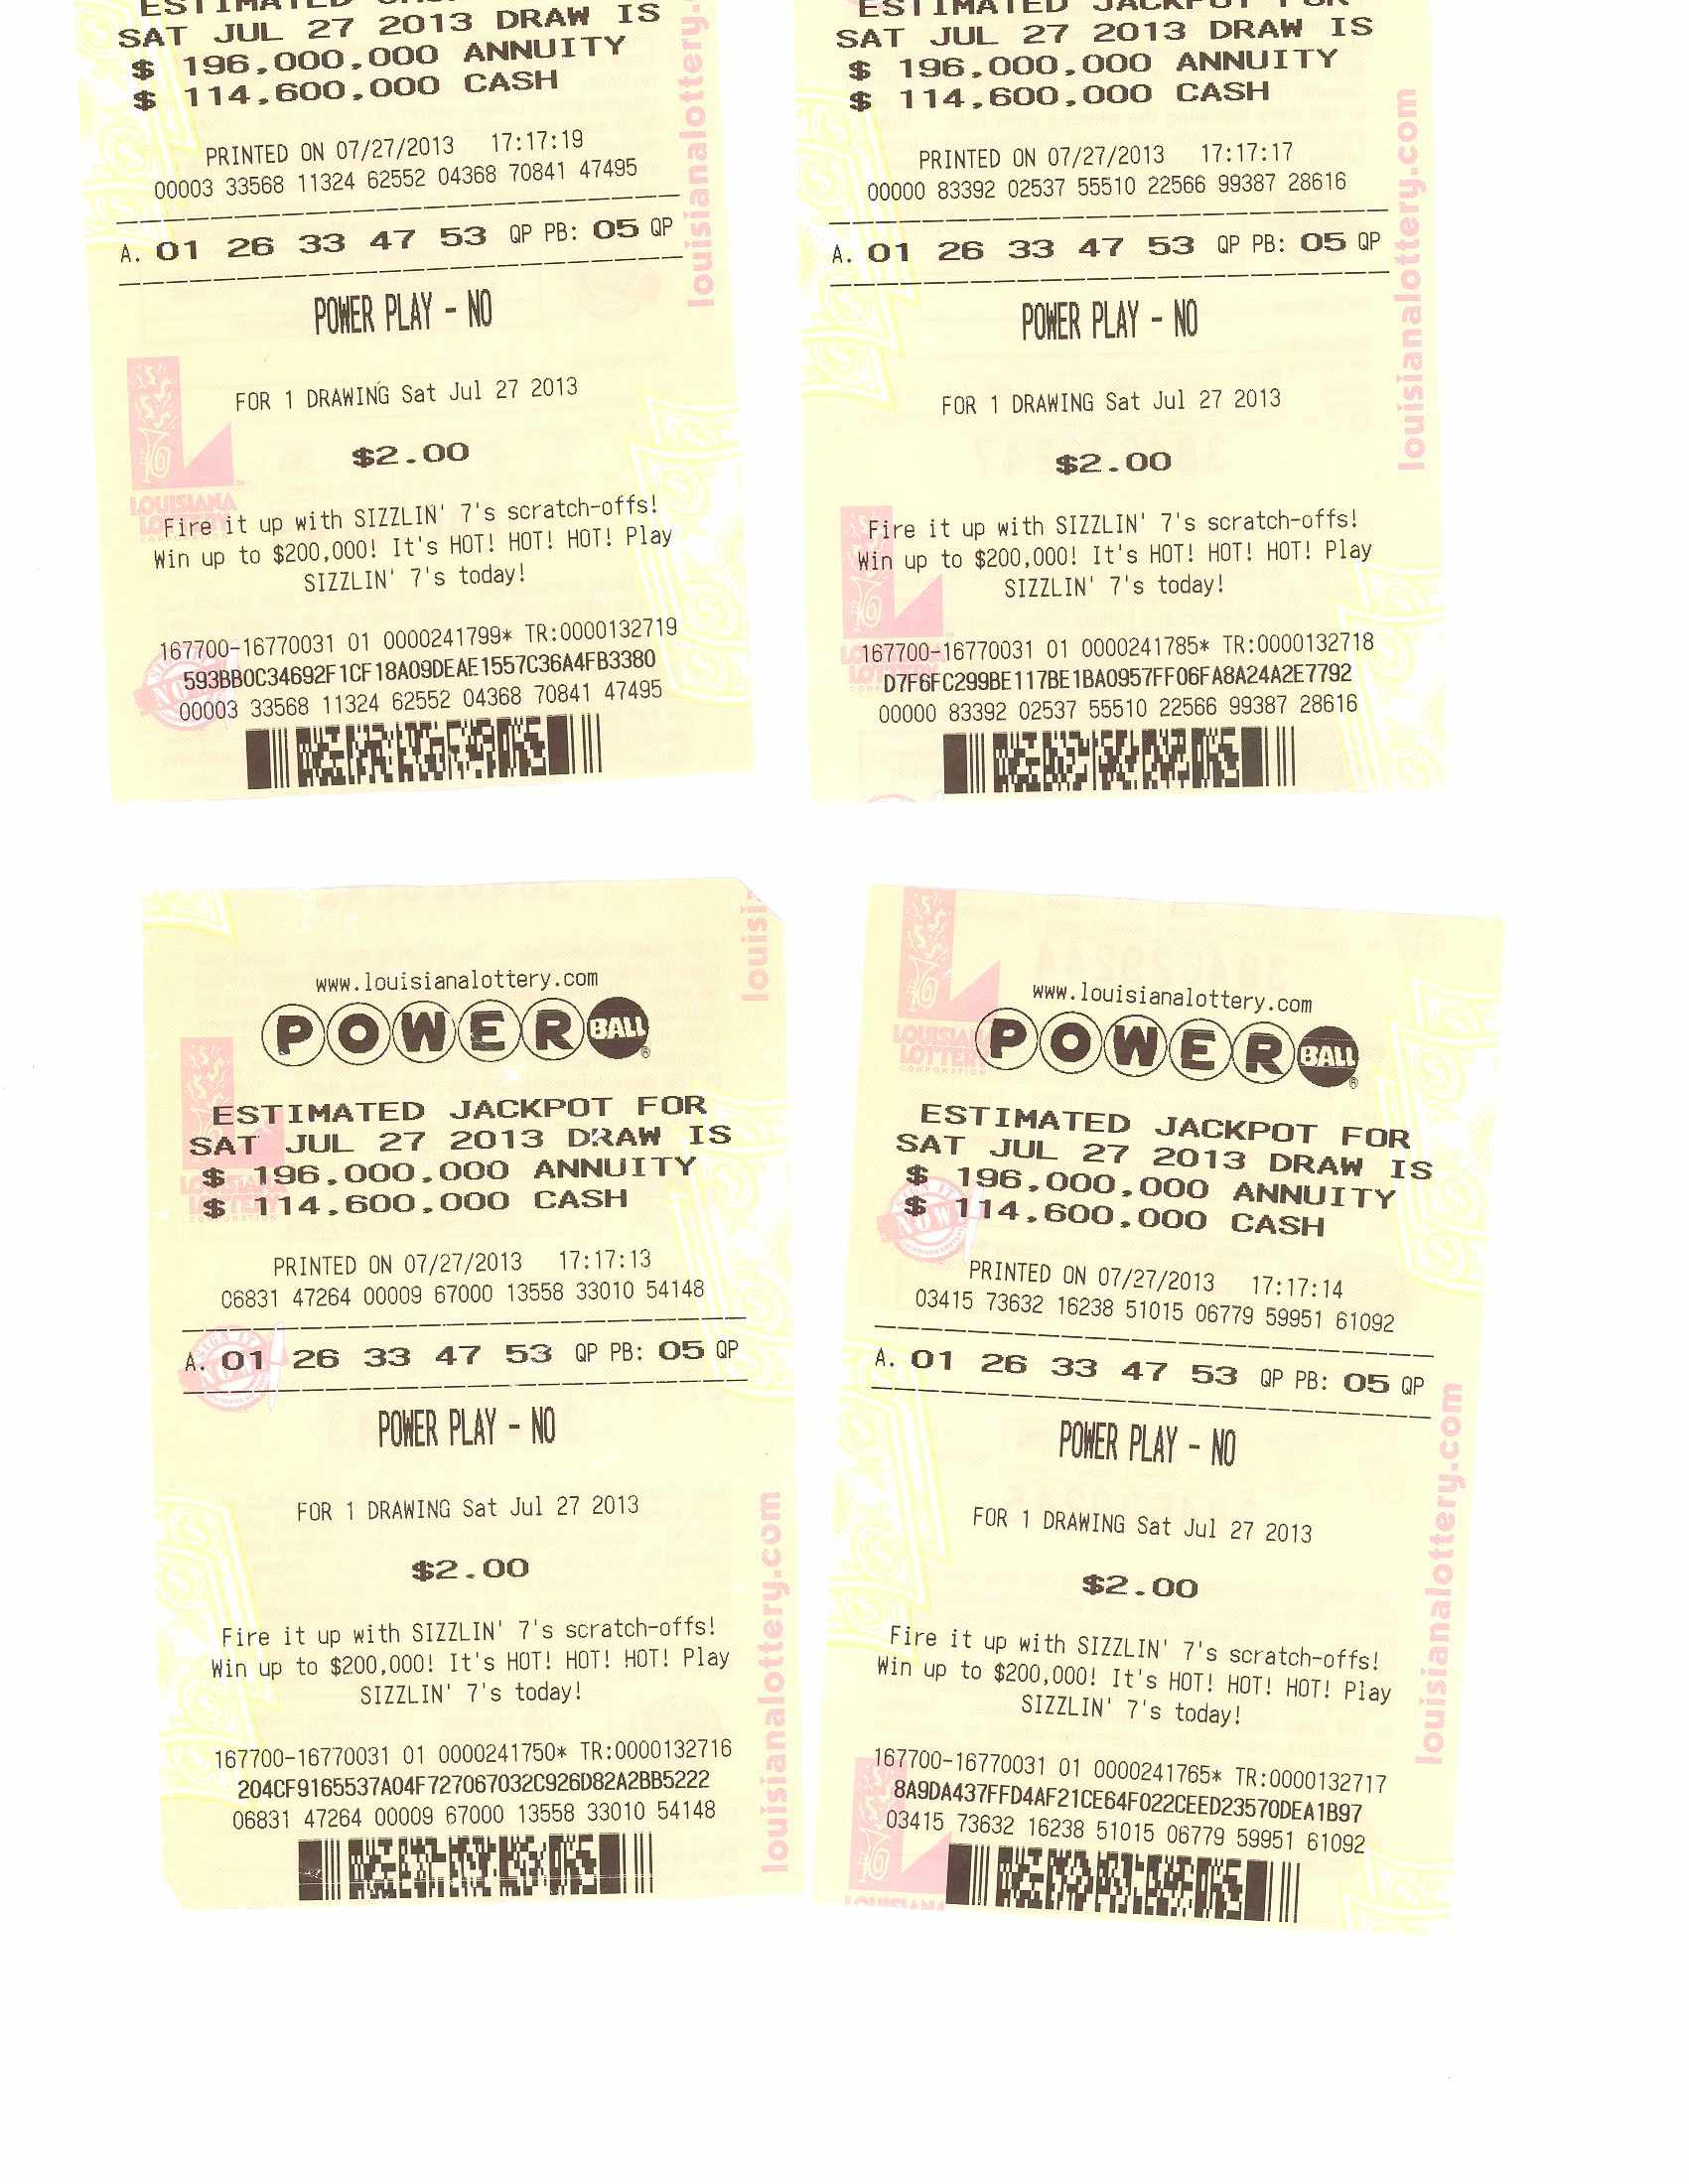 2013 - Duplicate Quick Pick Powerball tickets sold in Louisiana. How very sad.